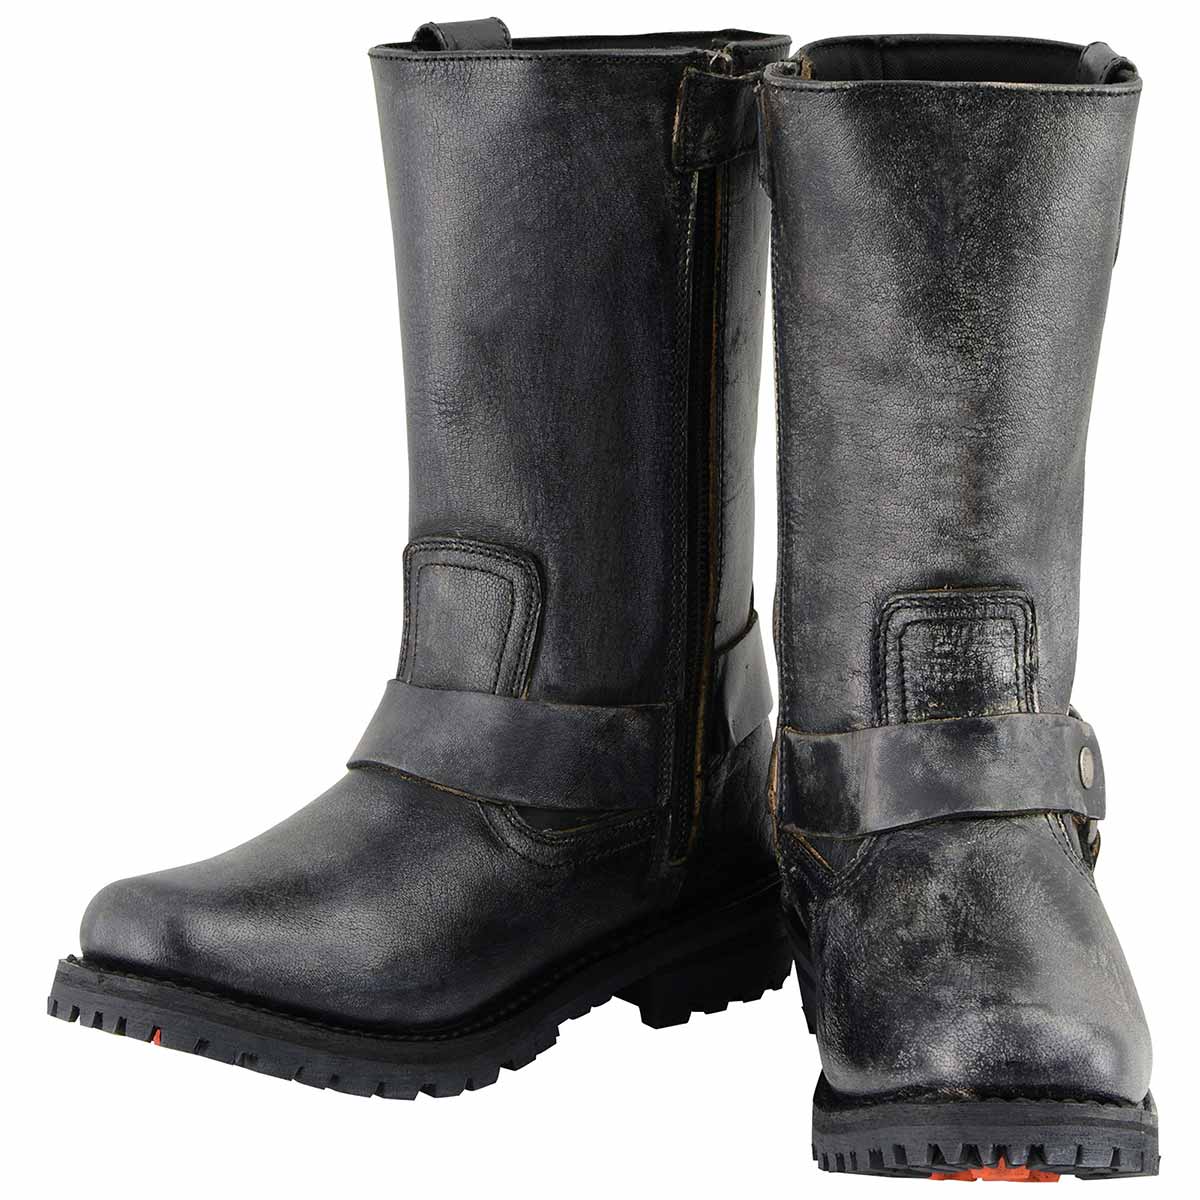 Men's Distressed Gray Leather 11-inch Classic Harness Square Toe Motorcycle Boots